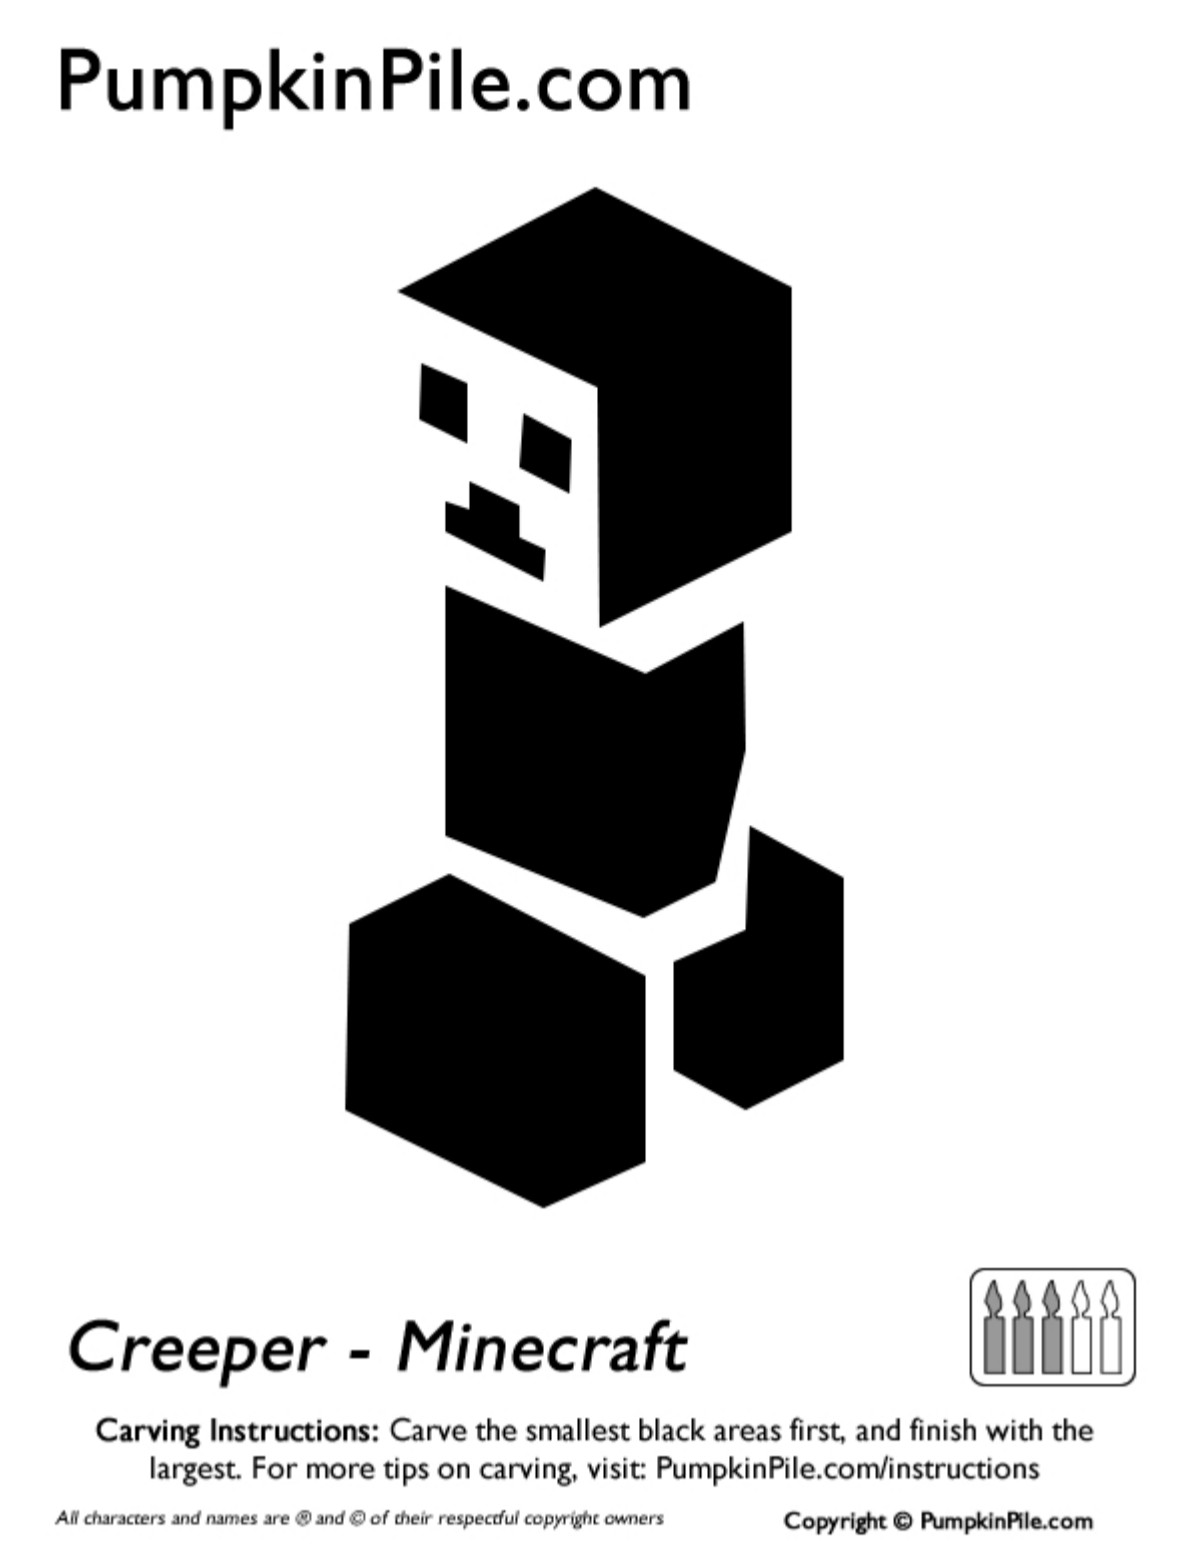 Minecraft Pumpkin Stencils 16 Easy to Use Pumpkin Carving Stencils to Help You Win